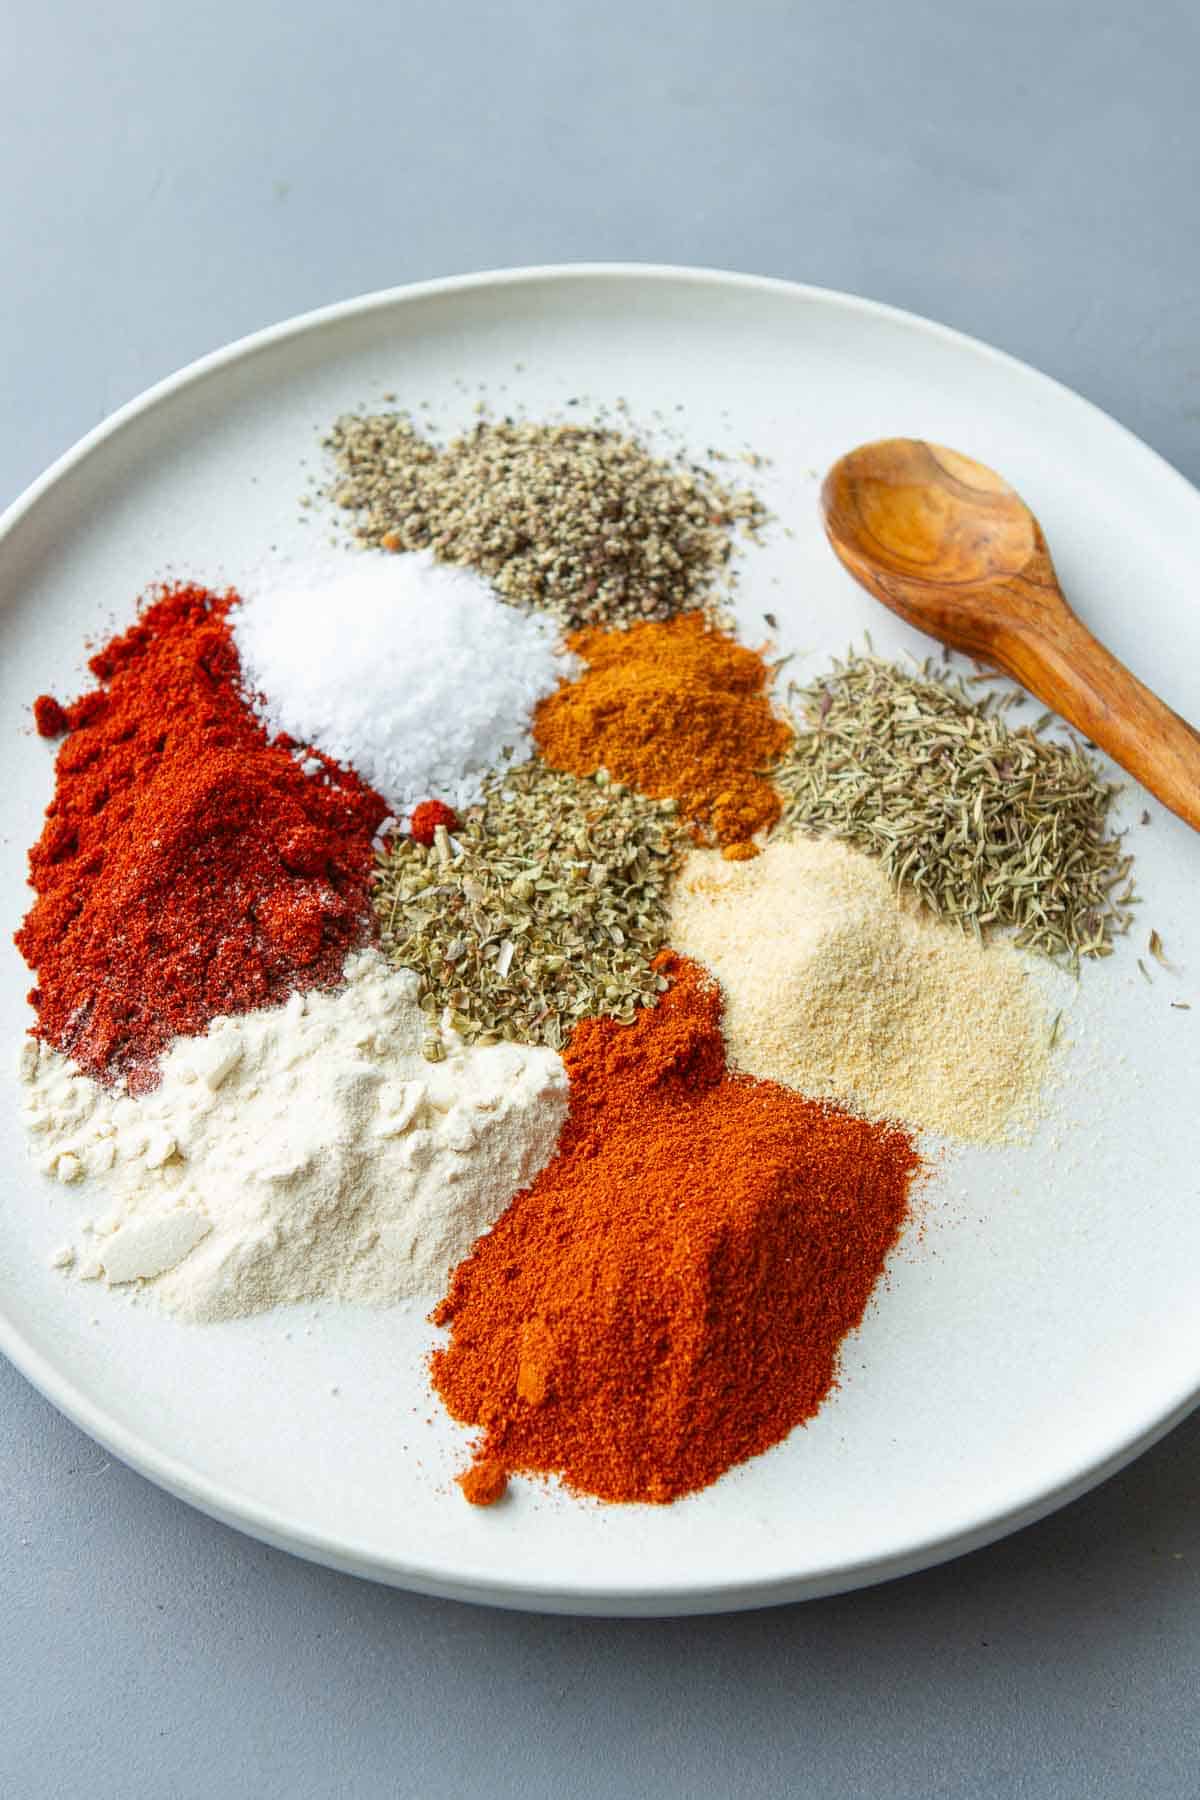 Piles of herbs and spices on a white plate.